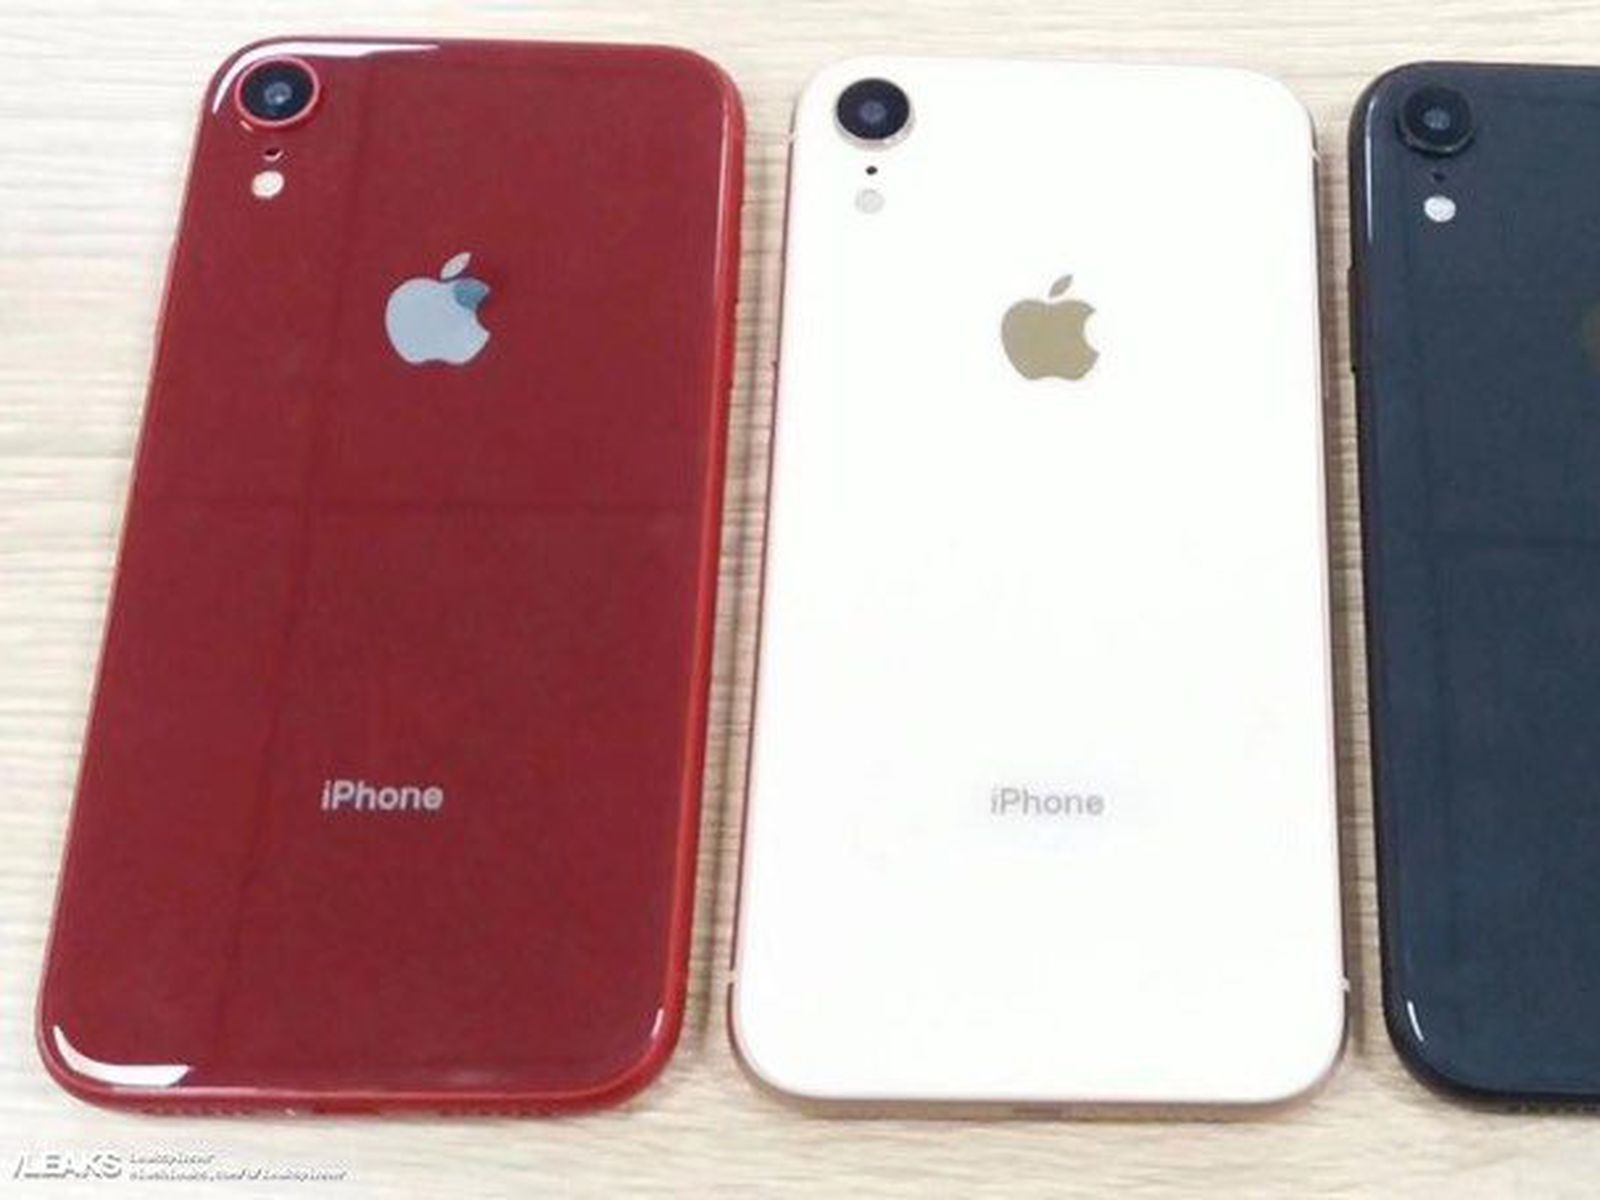 Alleged iPhone 14 Pro colors shown in new dummy pictures and video -   News